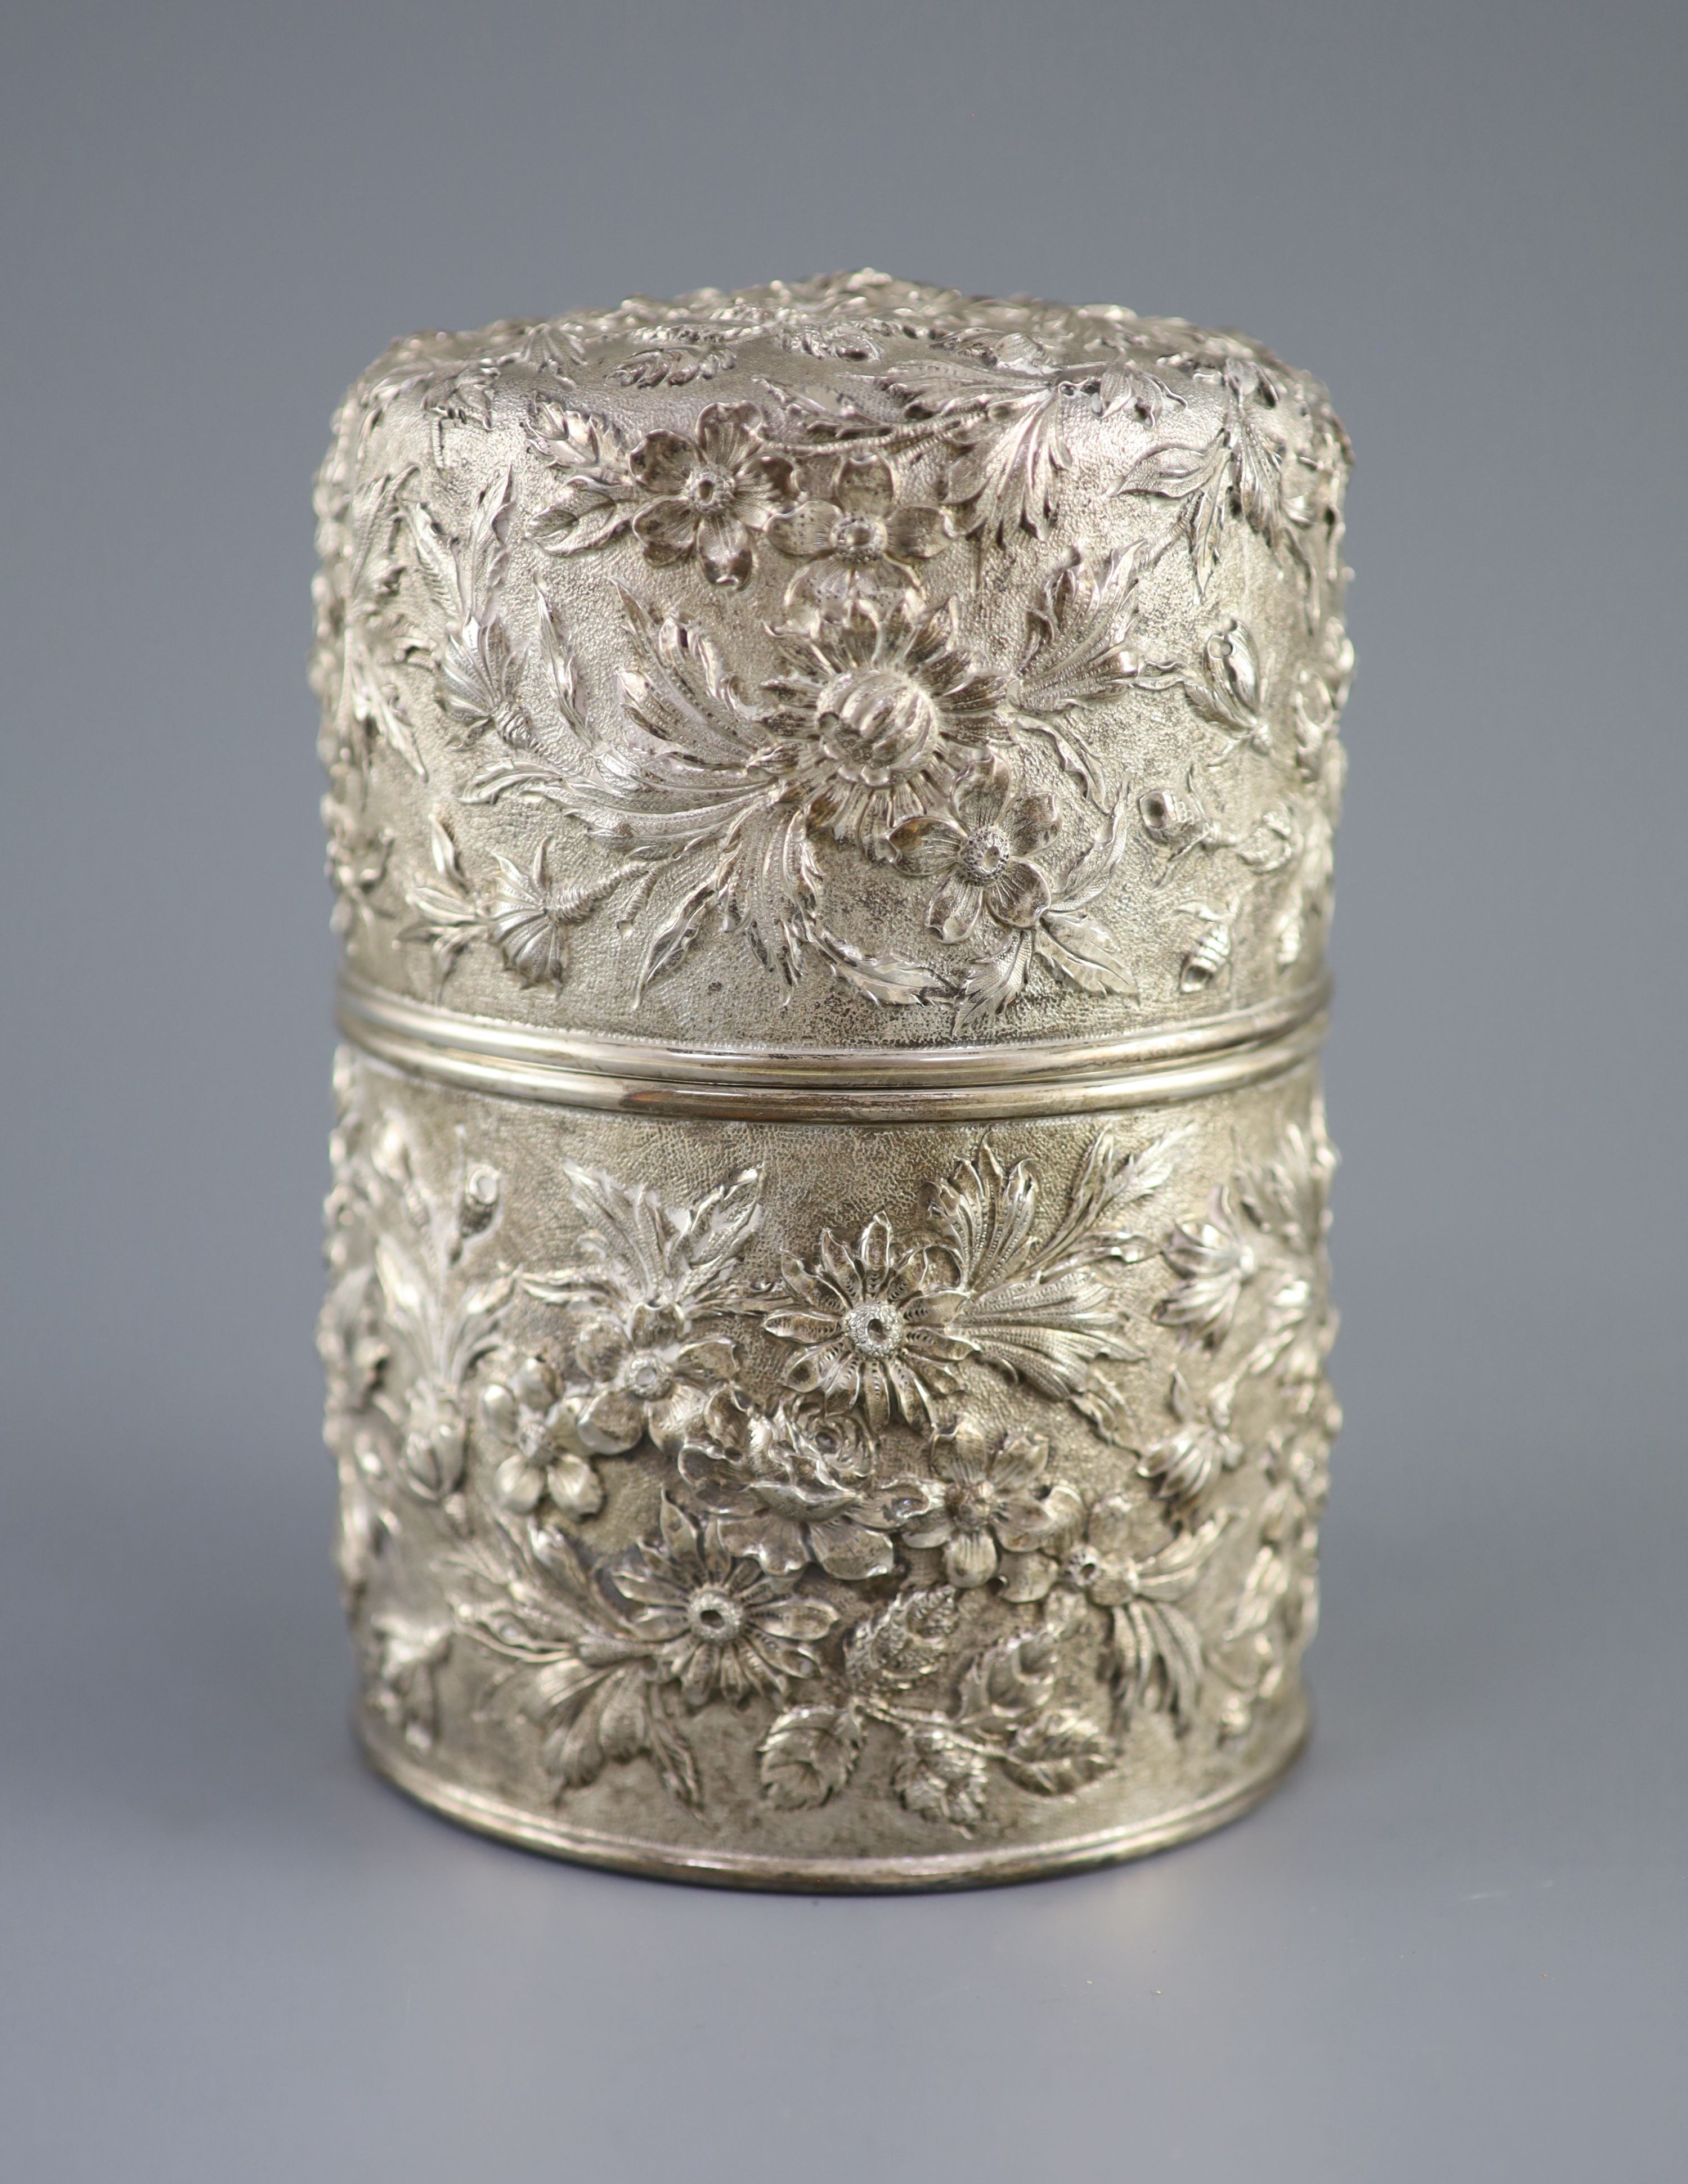 A cased late 19th/early 20th century American S.Kirk & Son Co. embossed sterling silver cylindrical